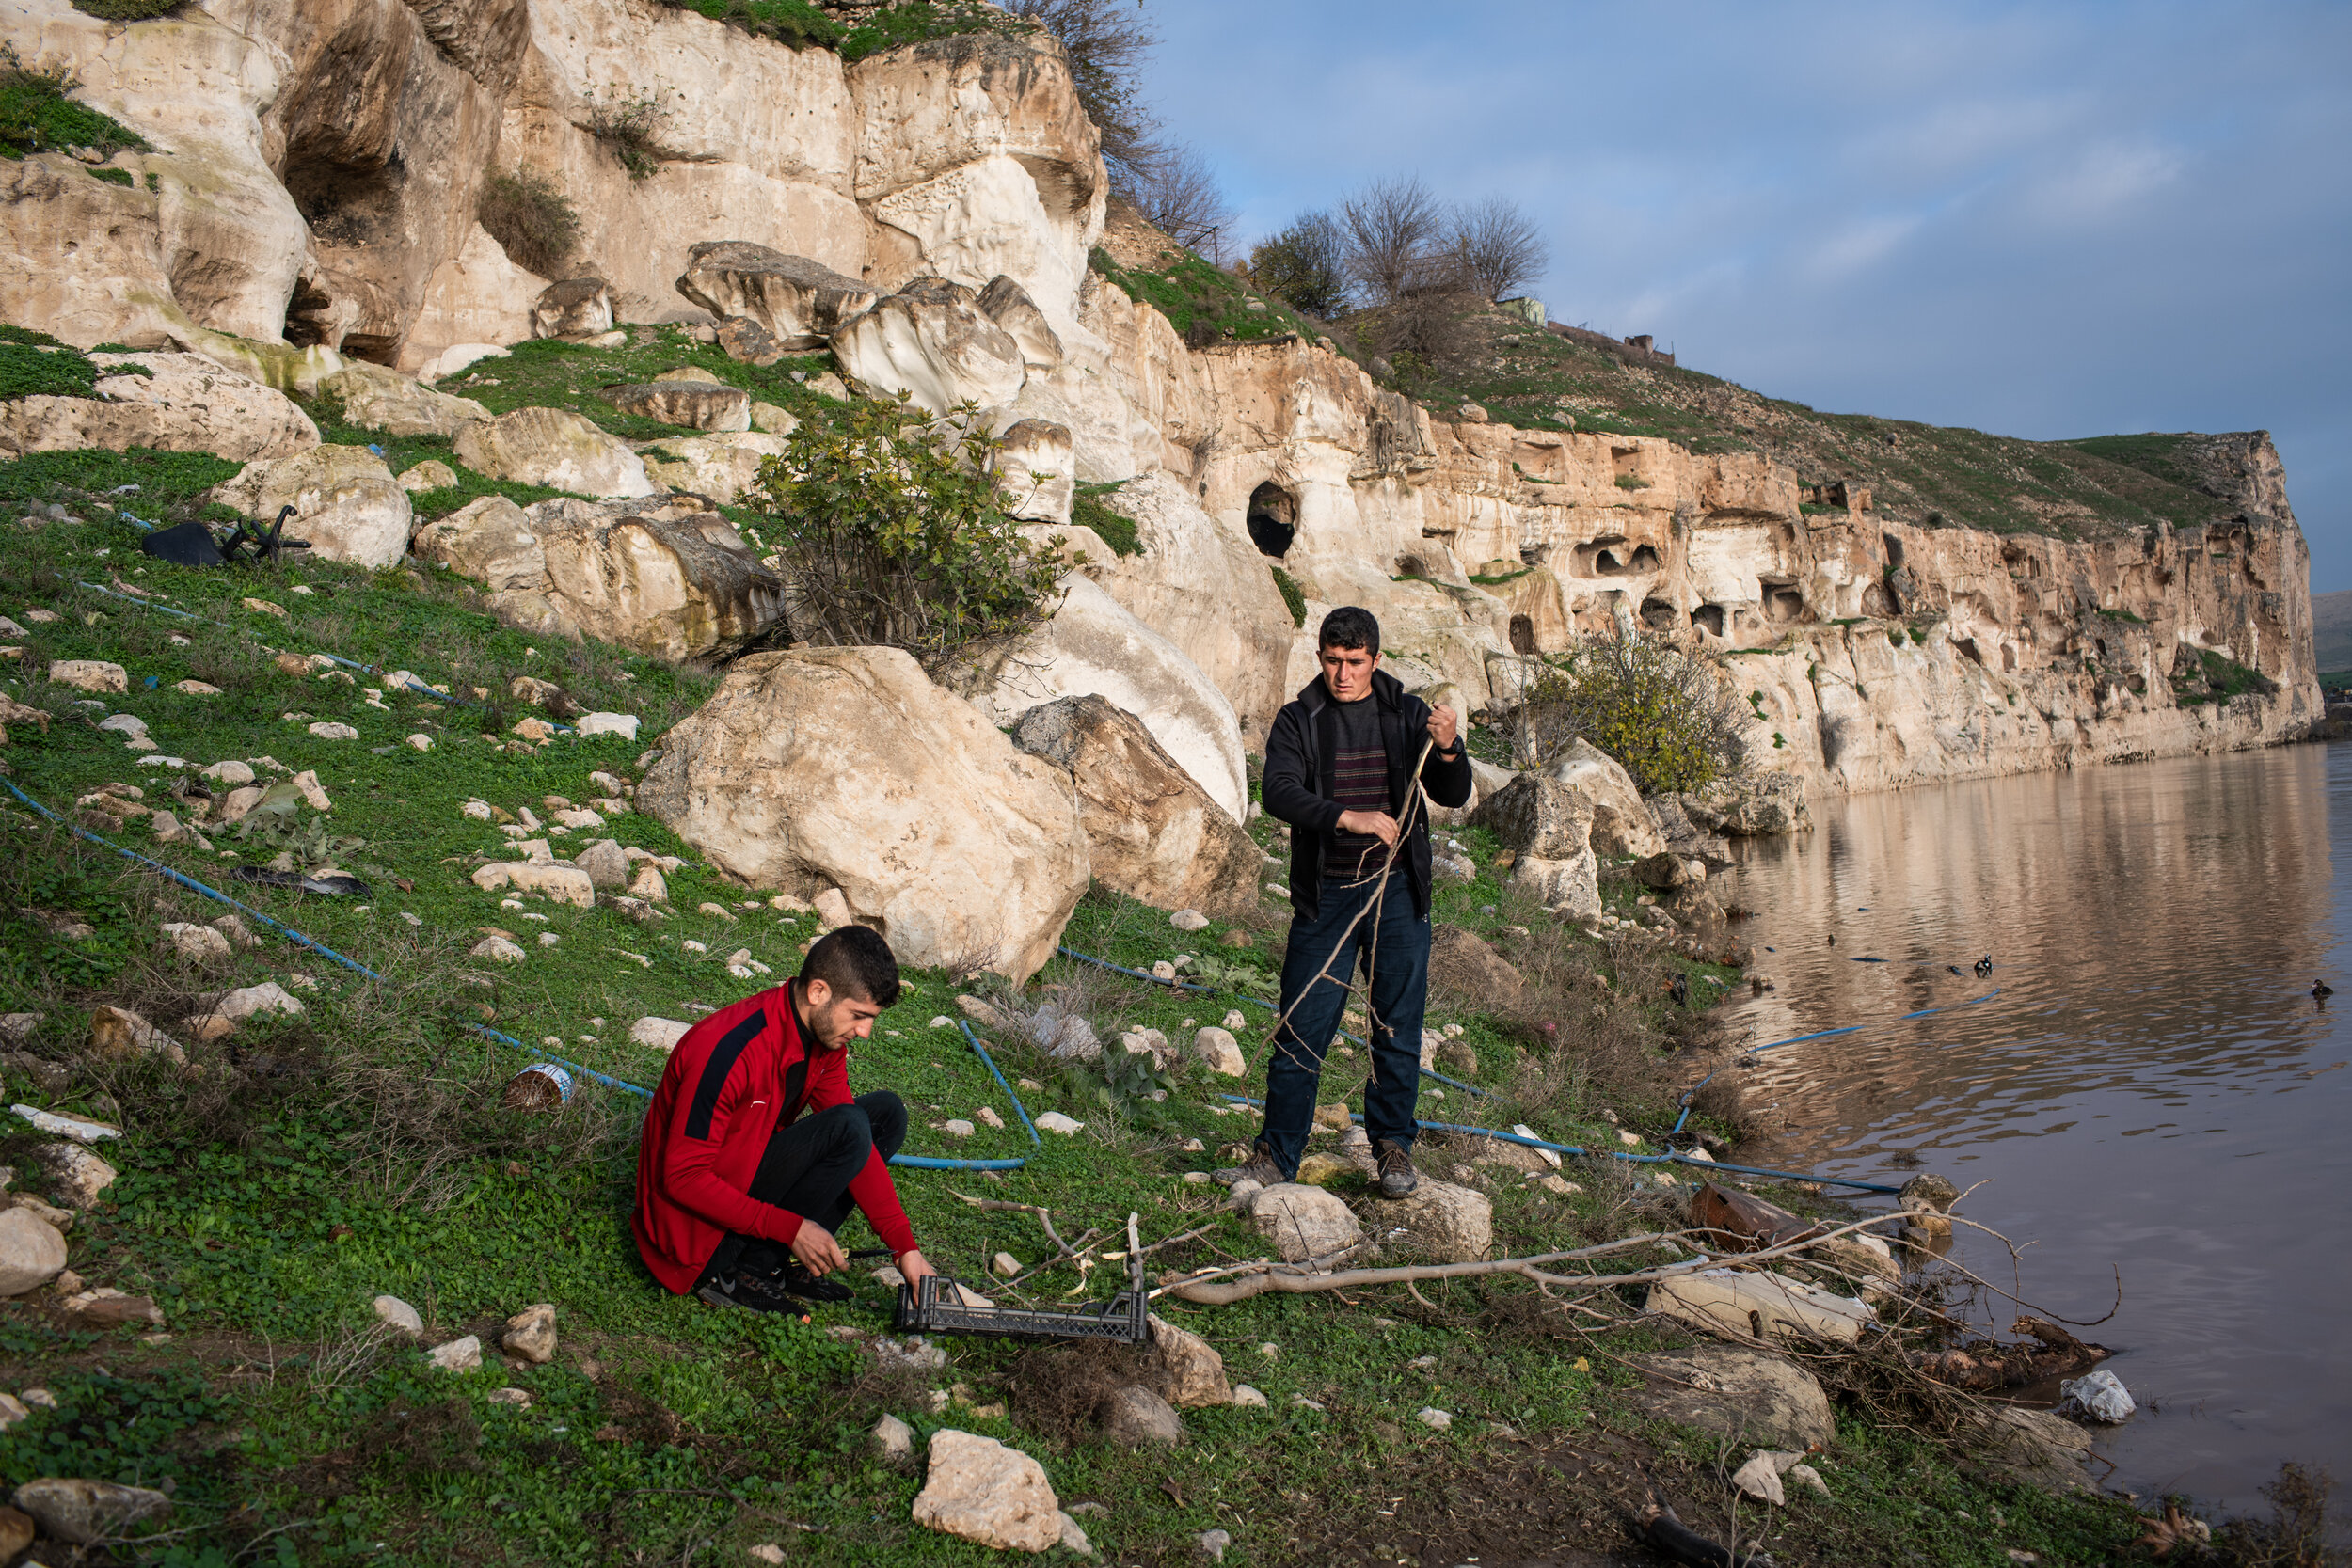 Young men prepare a fire beneath ancient caves on the northern bank of the Tigris River